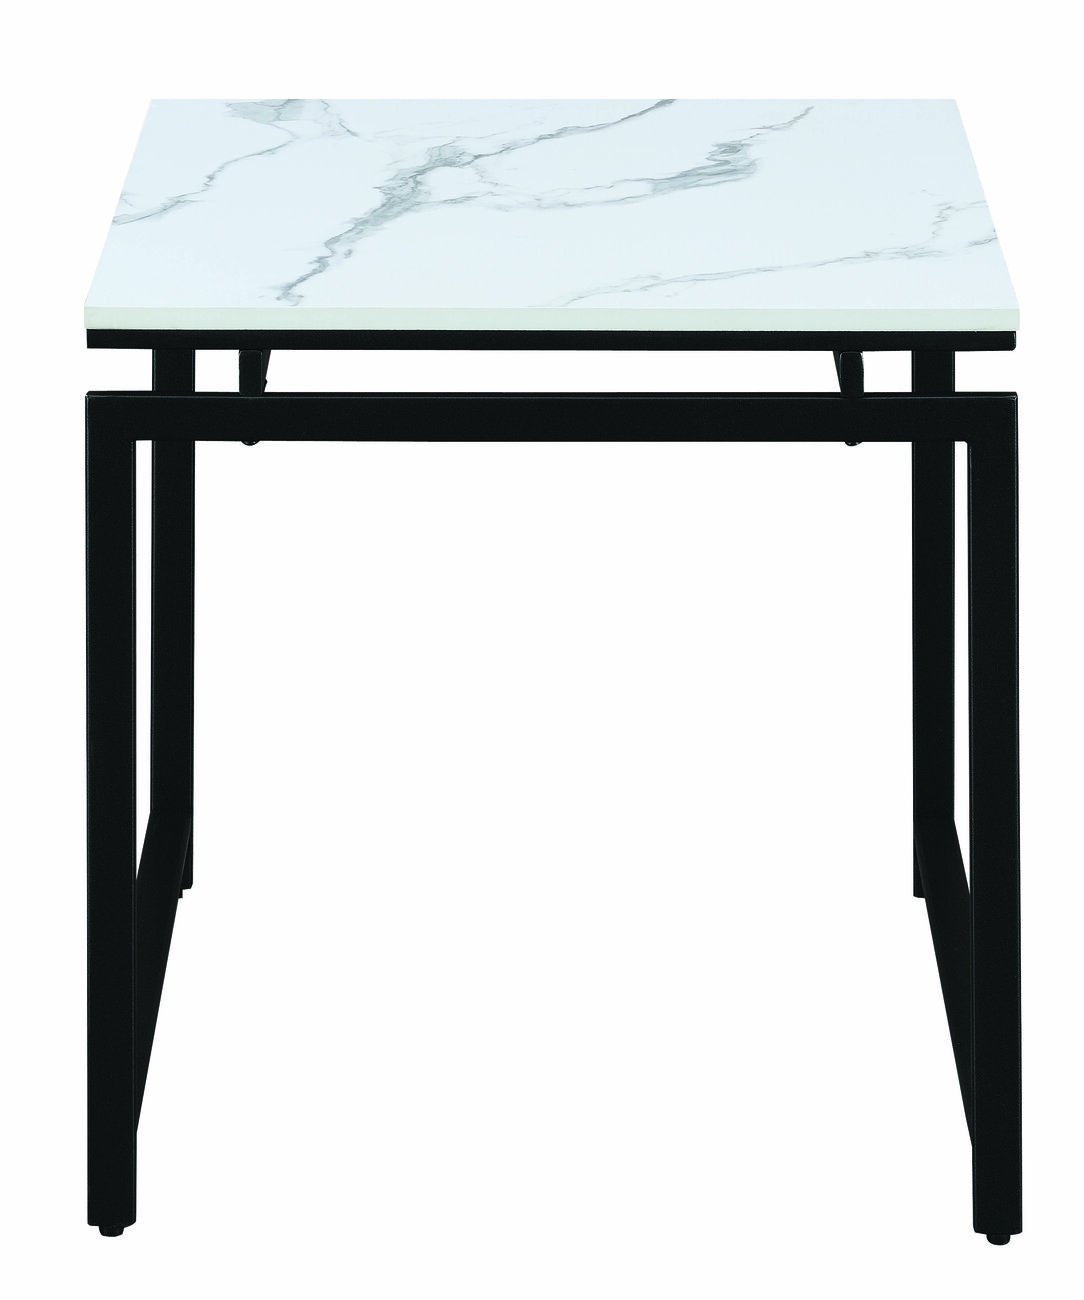 3 Piece Metal Base Occasional Table Set with Faux Marble Top, Black and White